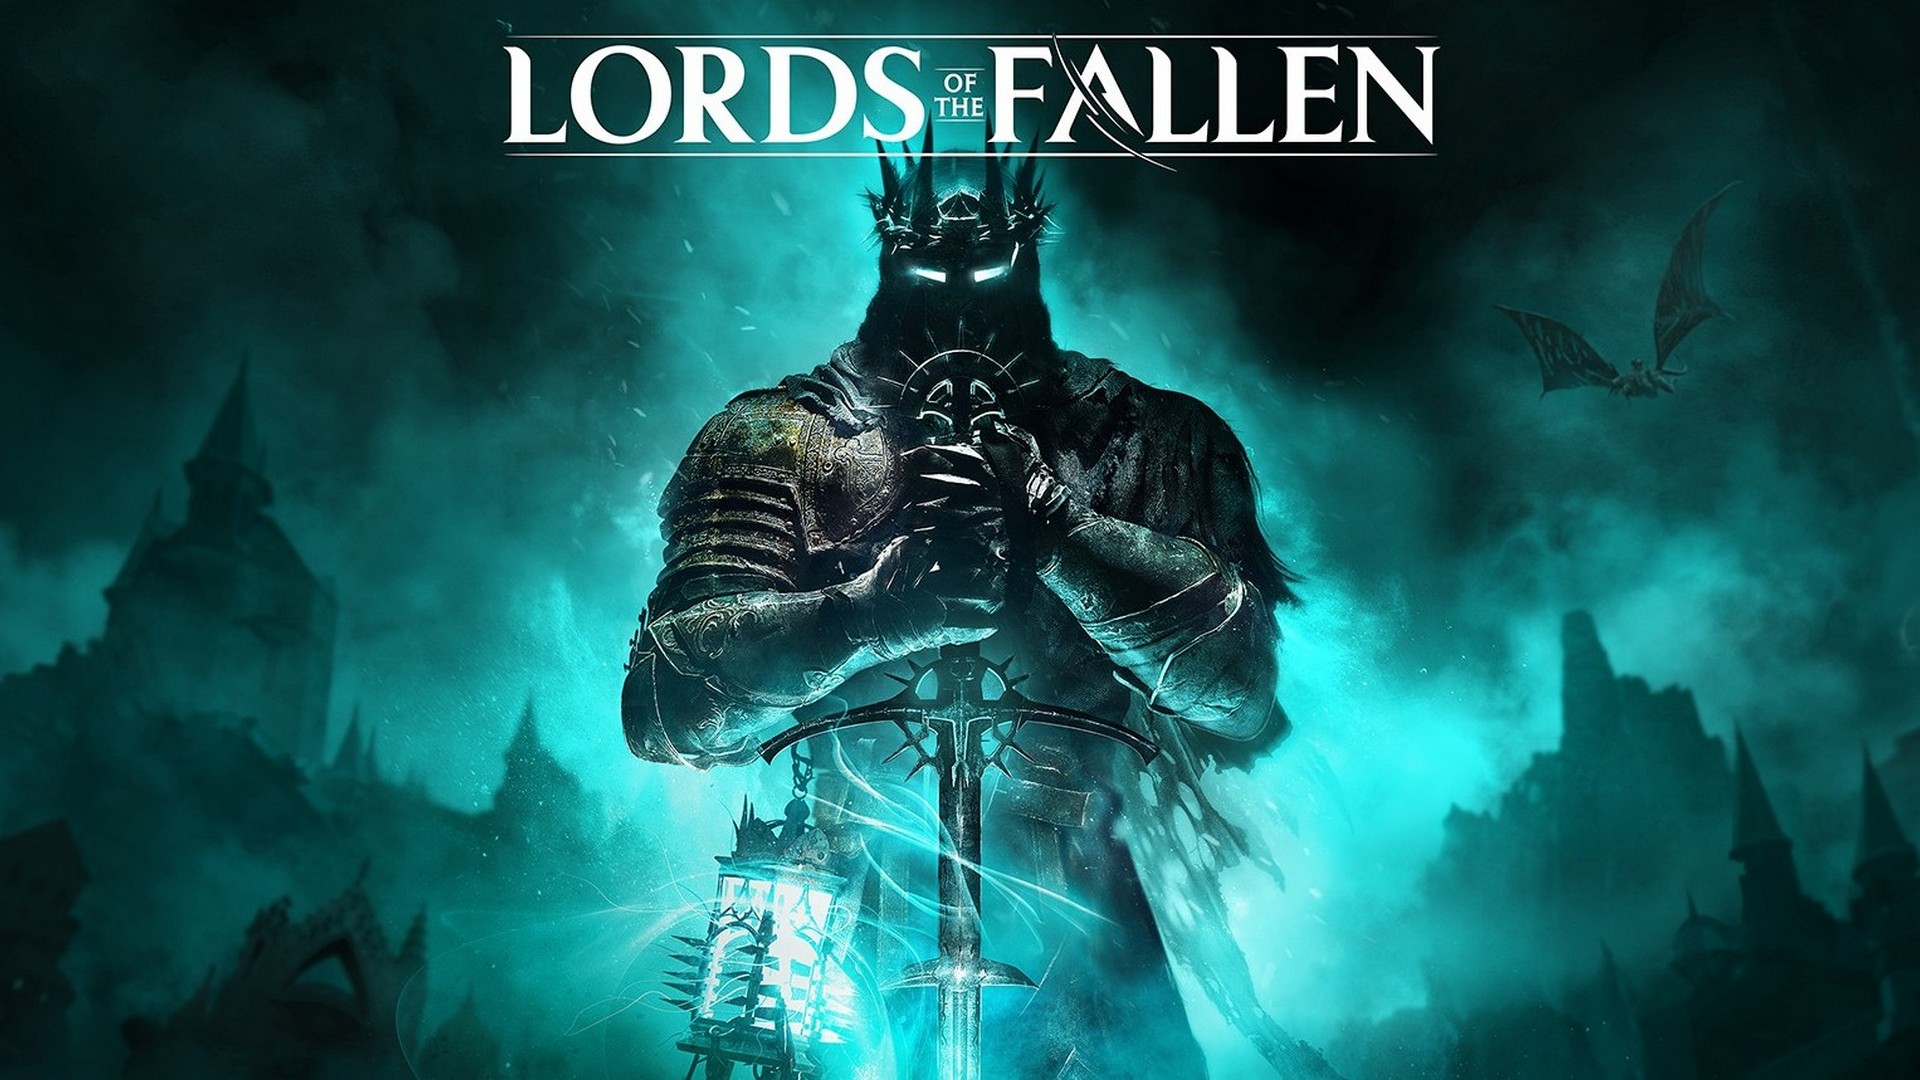 LORDS OF THE FALLEN - 17 Mins Uninterrupted Gameplay